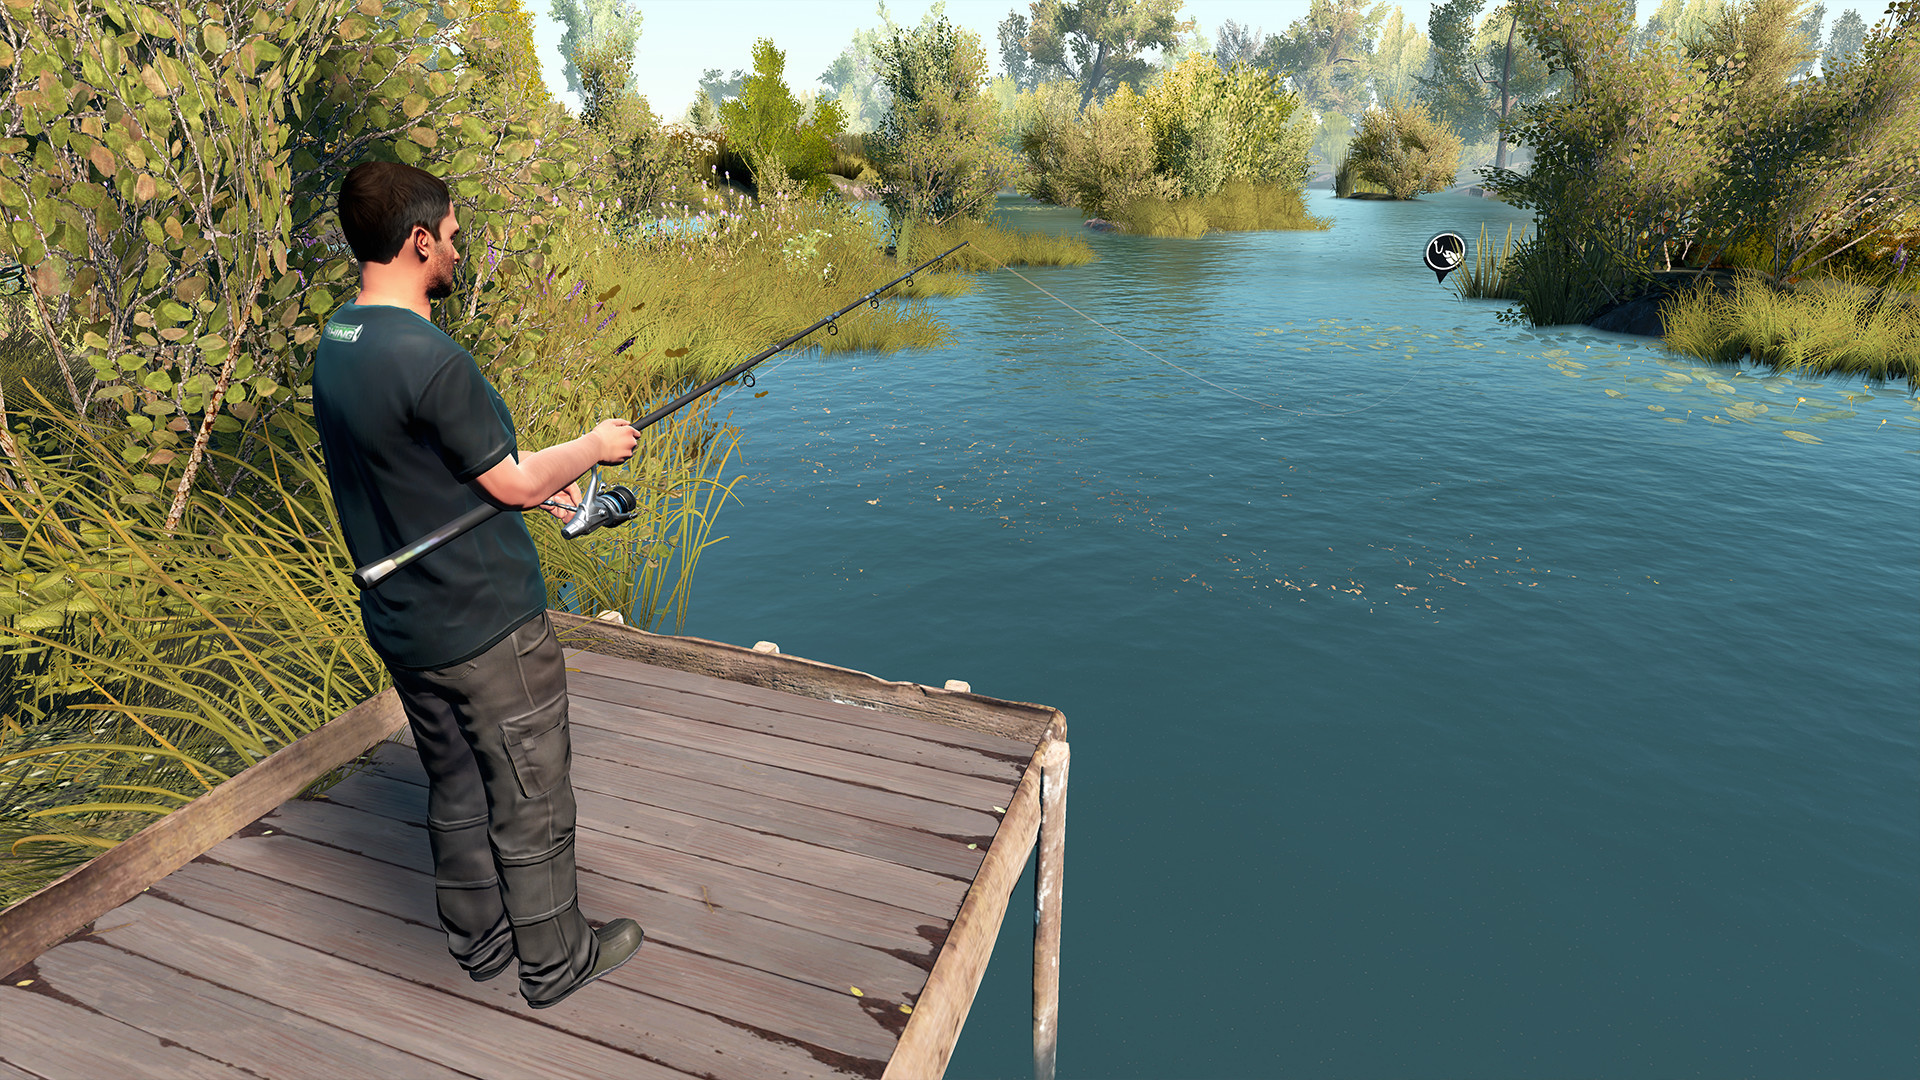 Скриншот *Euro Fishing - Collector's Edition [PS4] 5.05 / 6.72 / 7.02 [EUR] (2017) [Русский] (v1.06)*